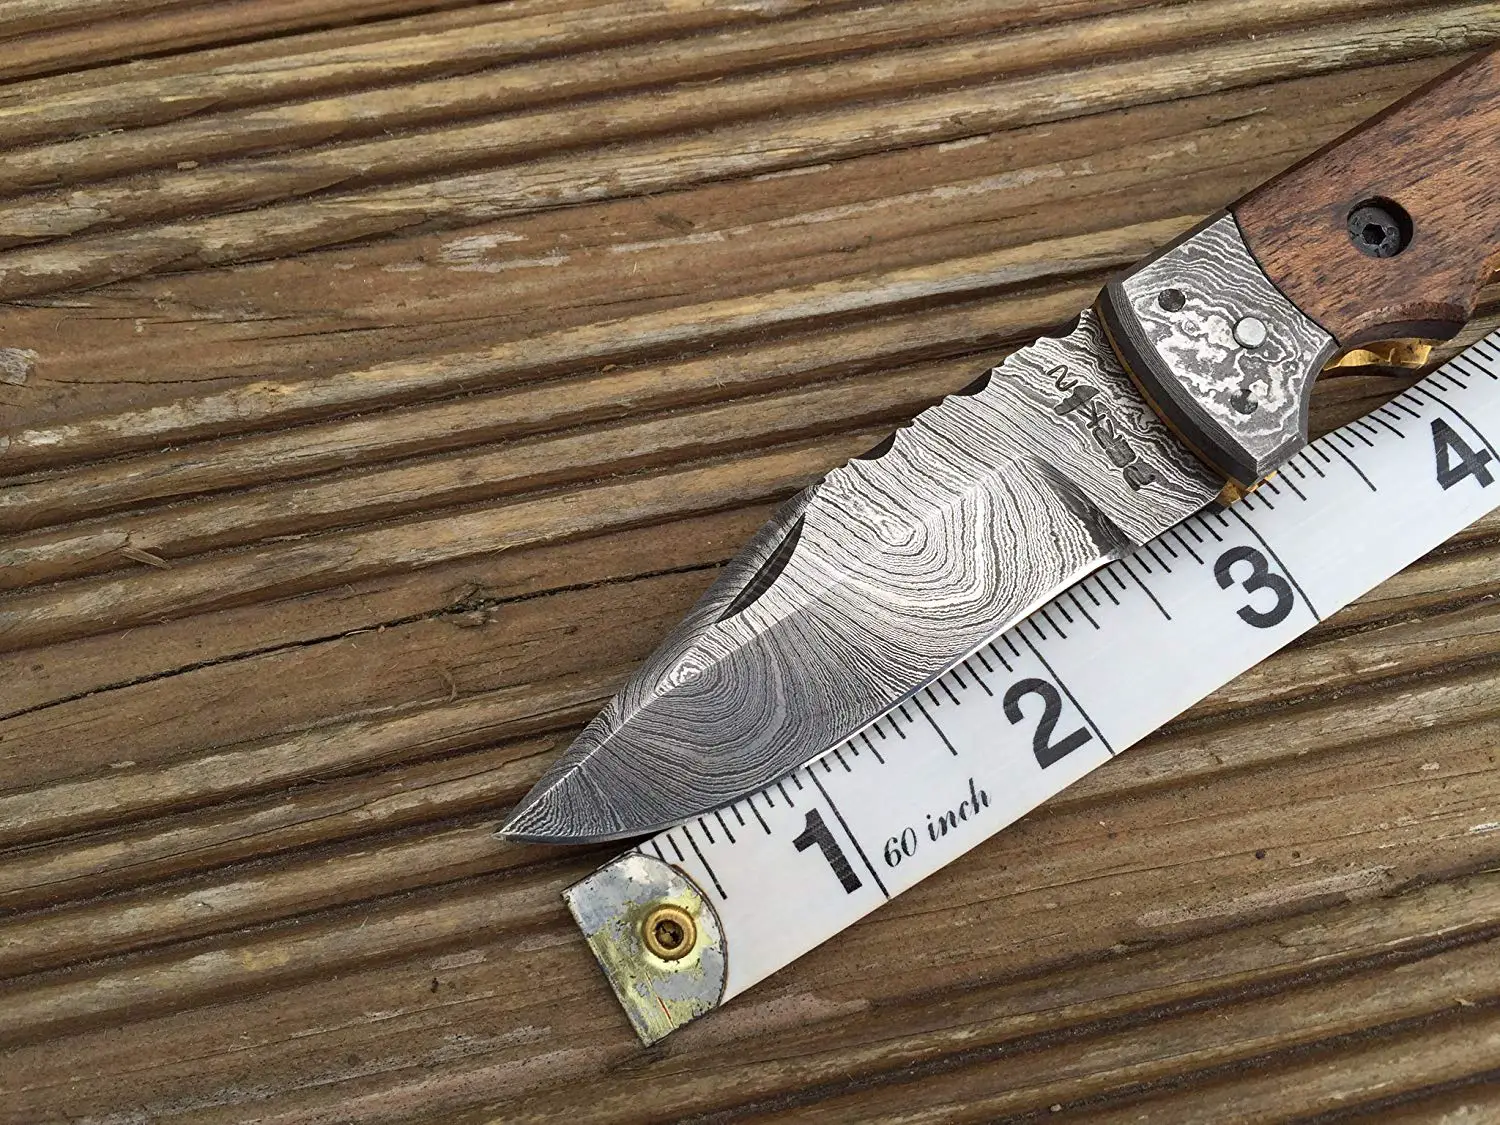 With a 2.9 inch blade the Perkin Damascus is ready for whatever you are.